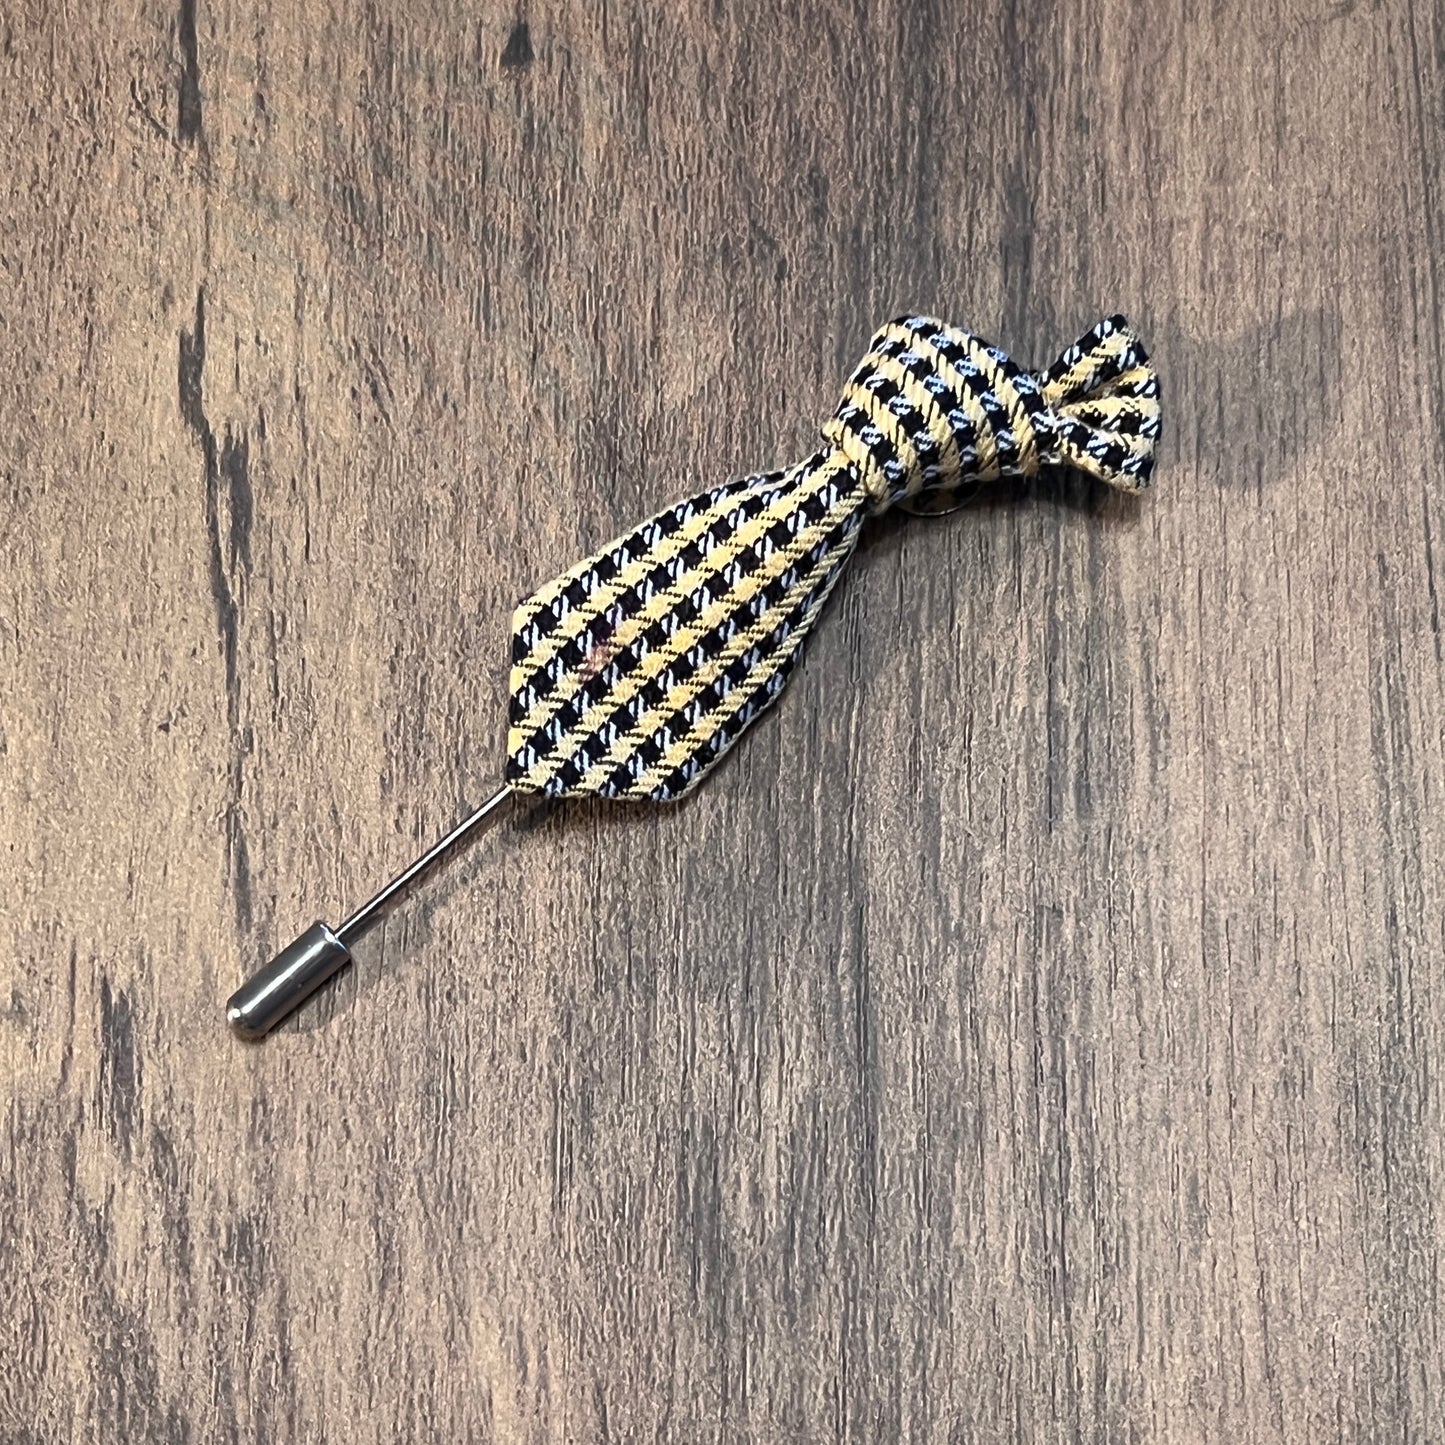 Tasker & Shaw | Luxury Menswear | Yellow and Black hounds tooth tie lapel pin